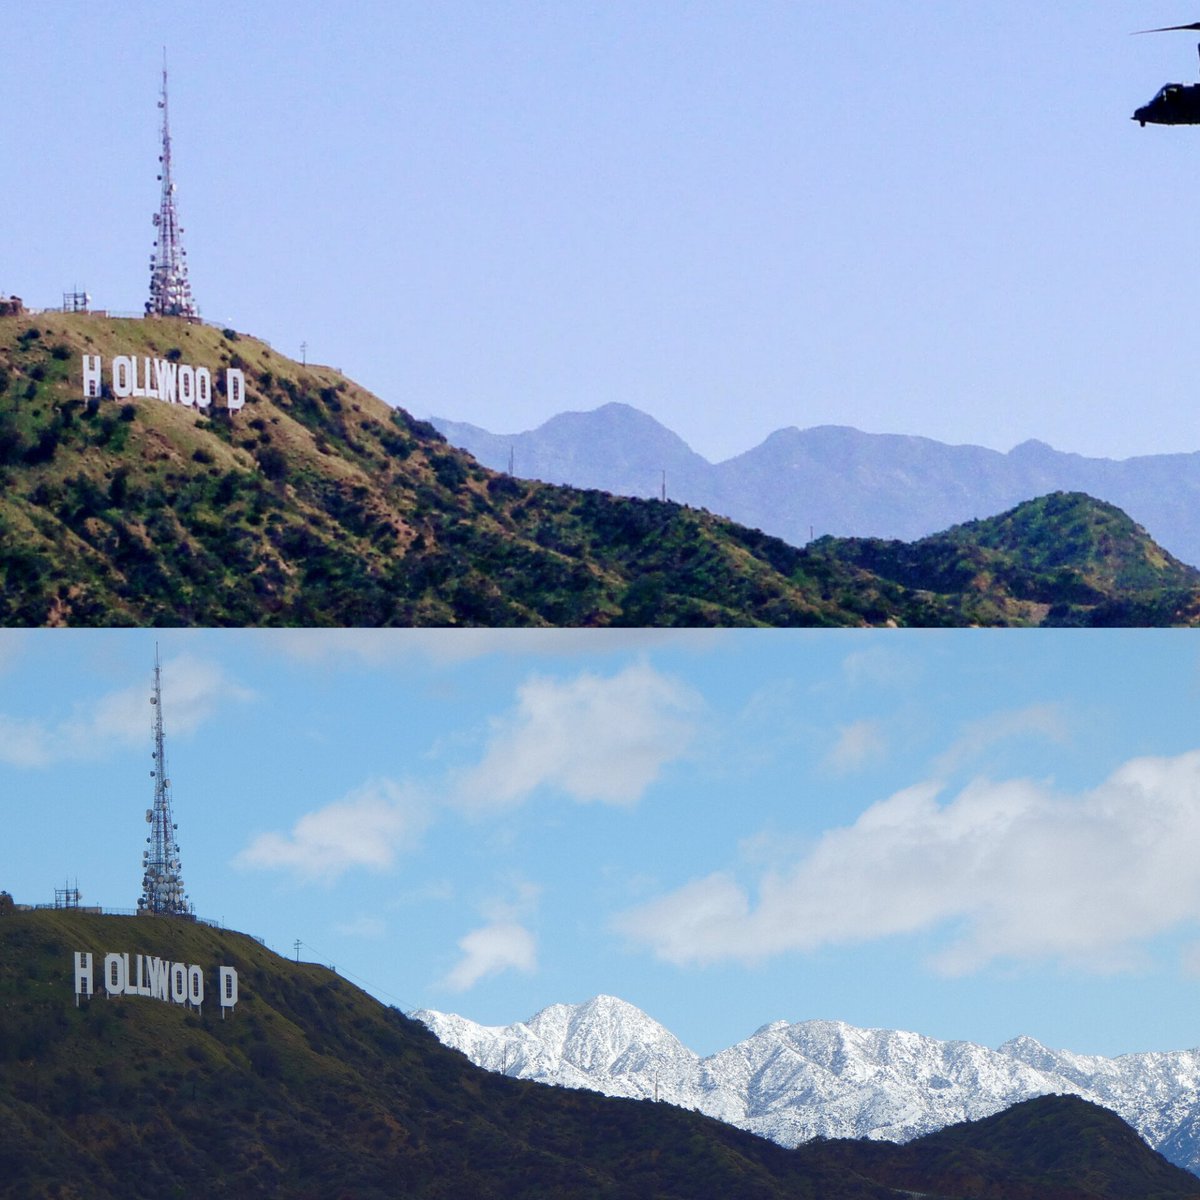 Before and after the winter storm in Los Angeles #LArain #HollywoodSign #LosAngeles #LAsnow